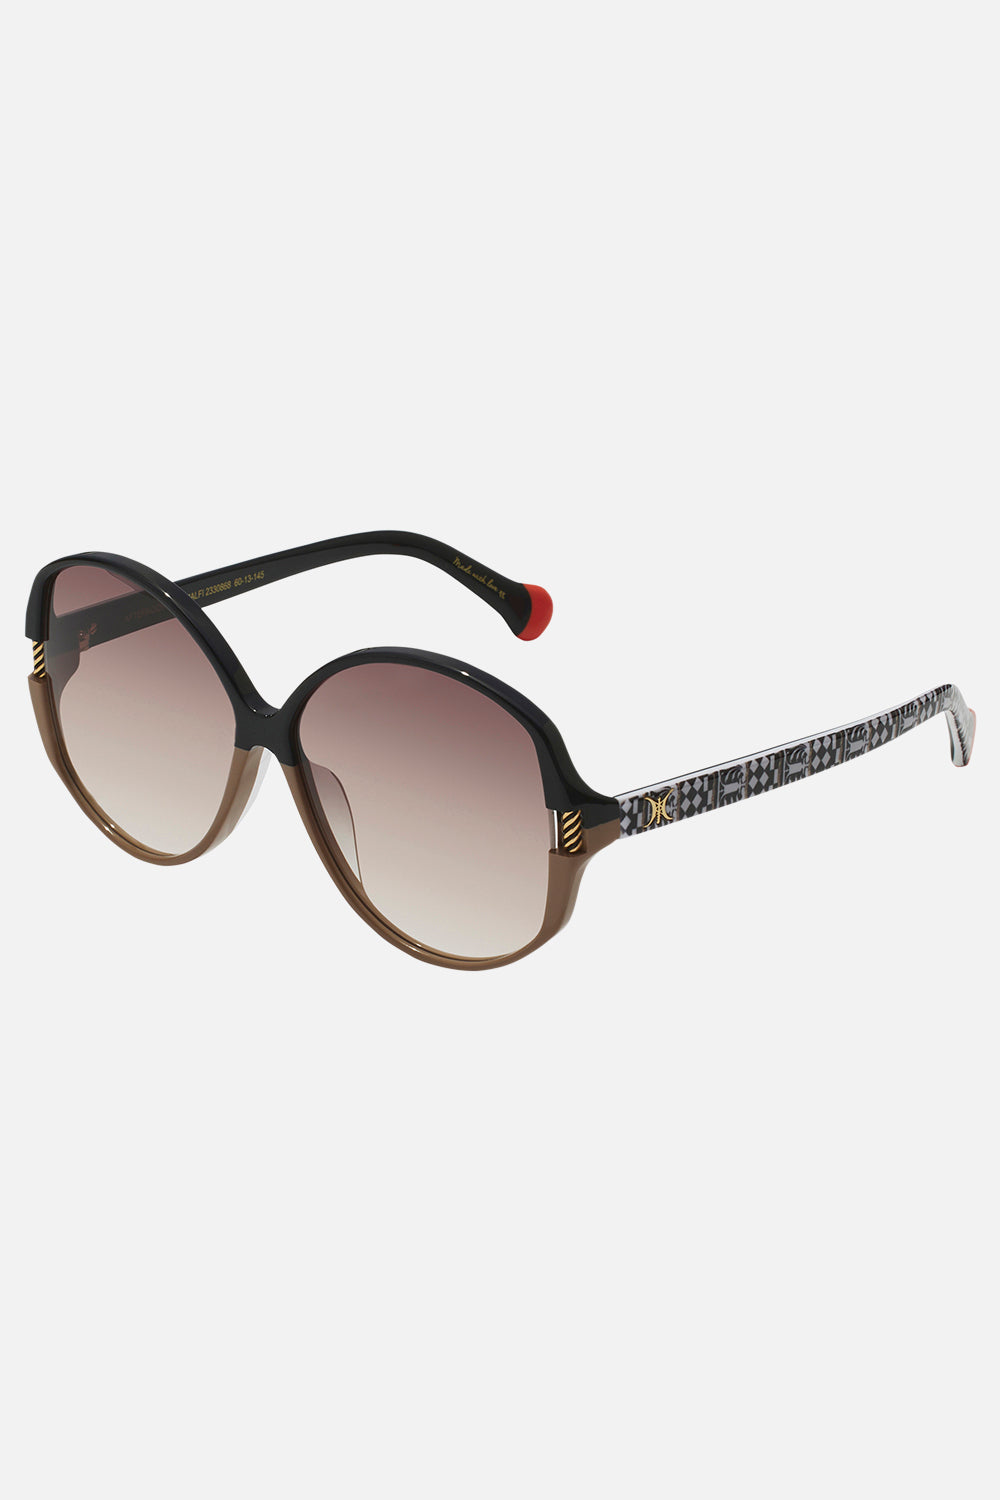 Product view of CAMILLA brown oversized designer sunglasses